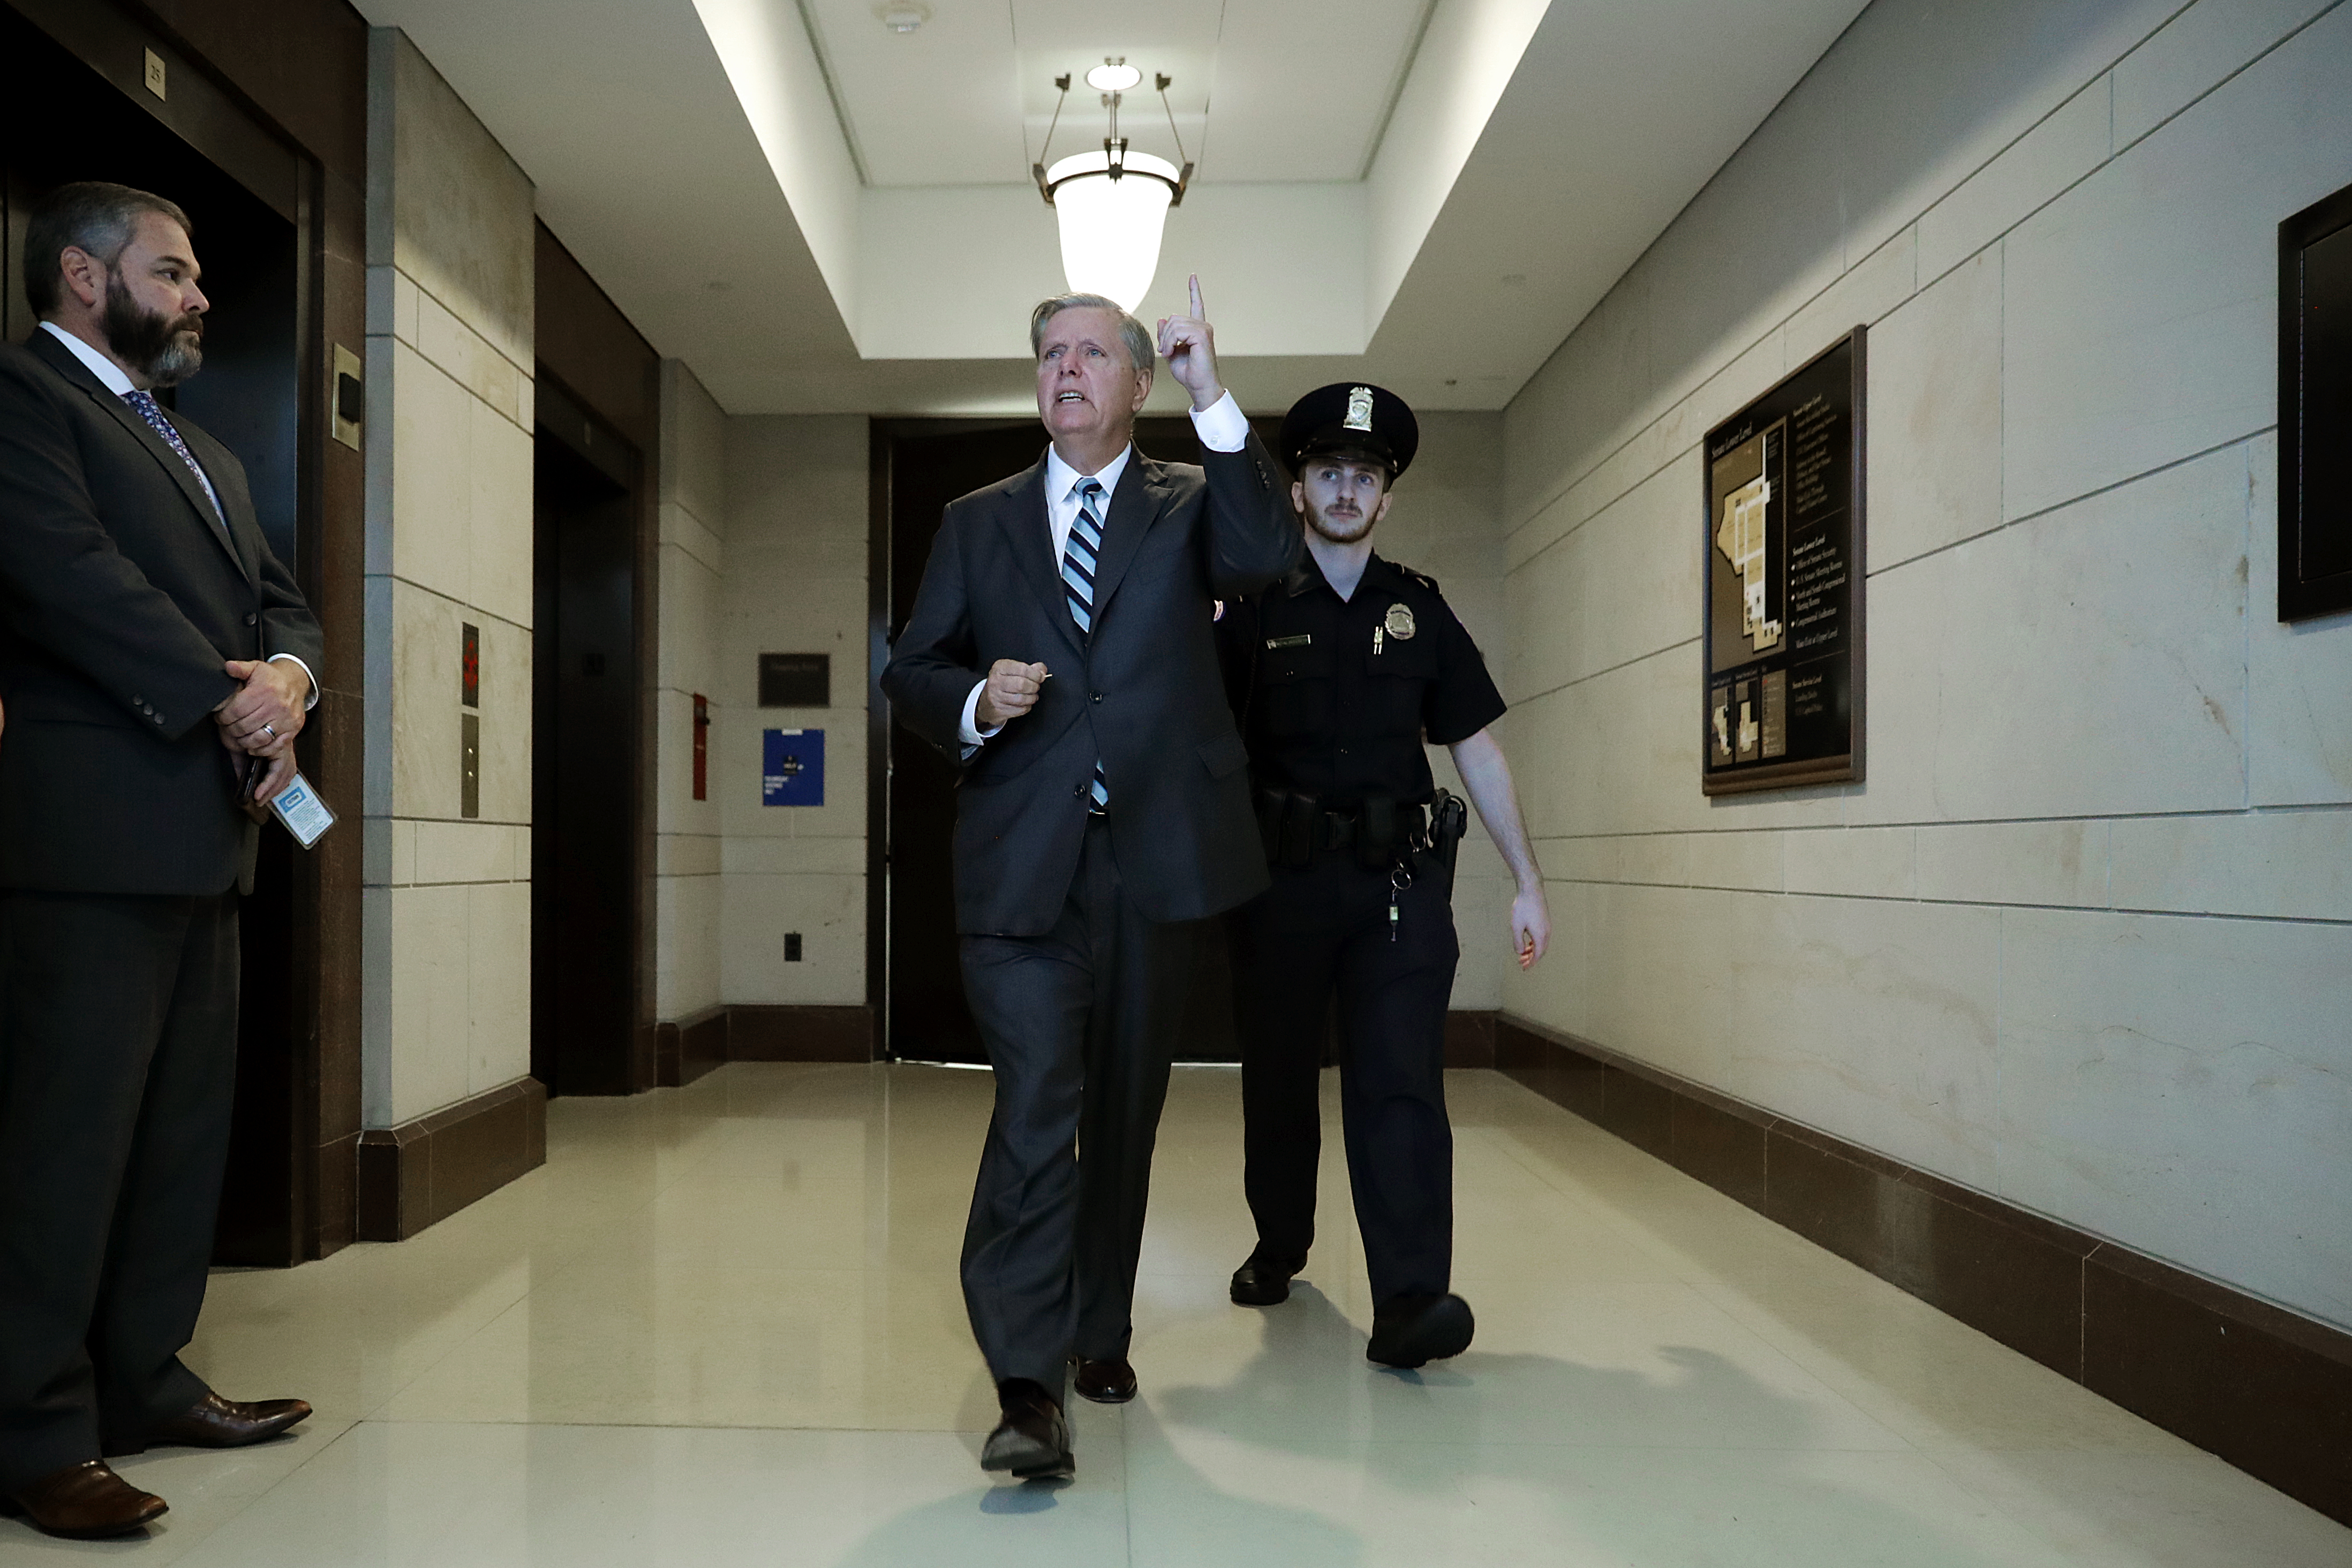 Senate Judiciary Committee member Sen. Lindsey Graham (R-SC) (C) leaves a secure meeting space inside the U.S. Capitol Visitors Center after reviewing the FBI report about alleged sexual assaults by Supreme Court nominee Judge Brett Kavanaugh (Chip Somodevilla/Getty Images)